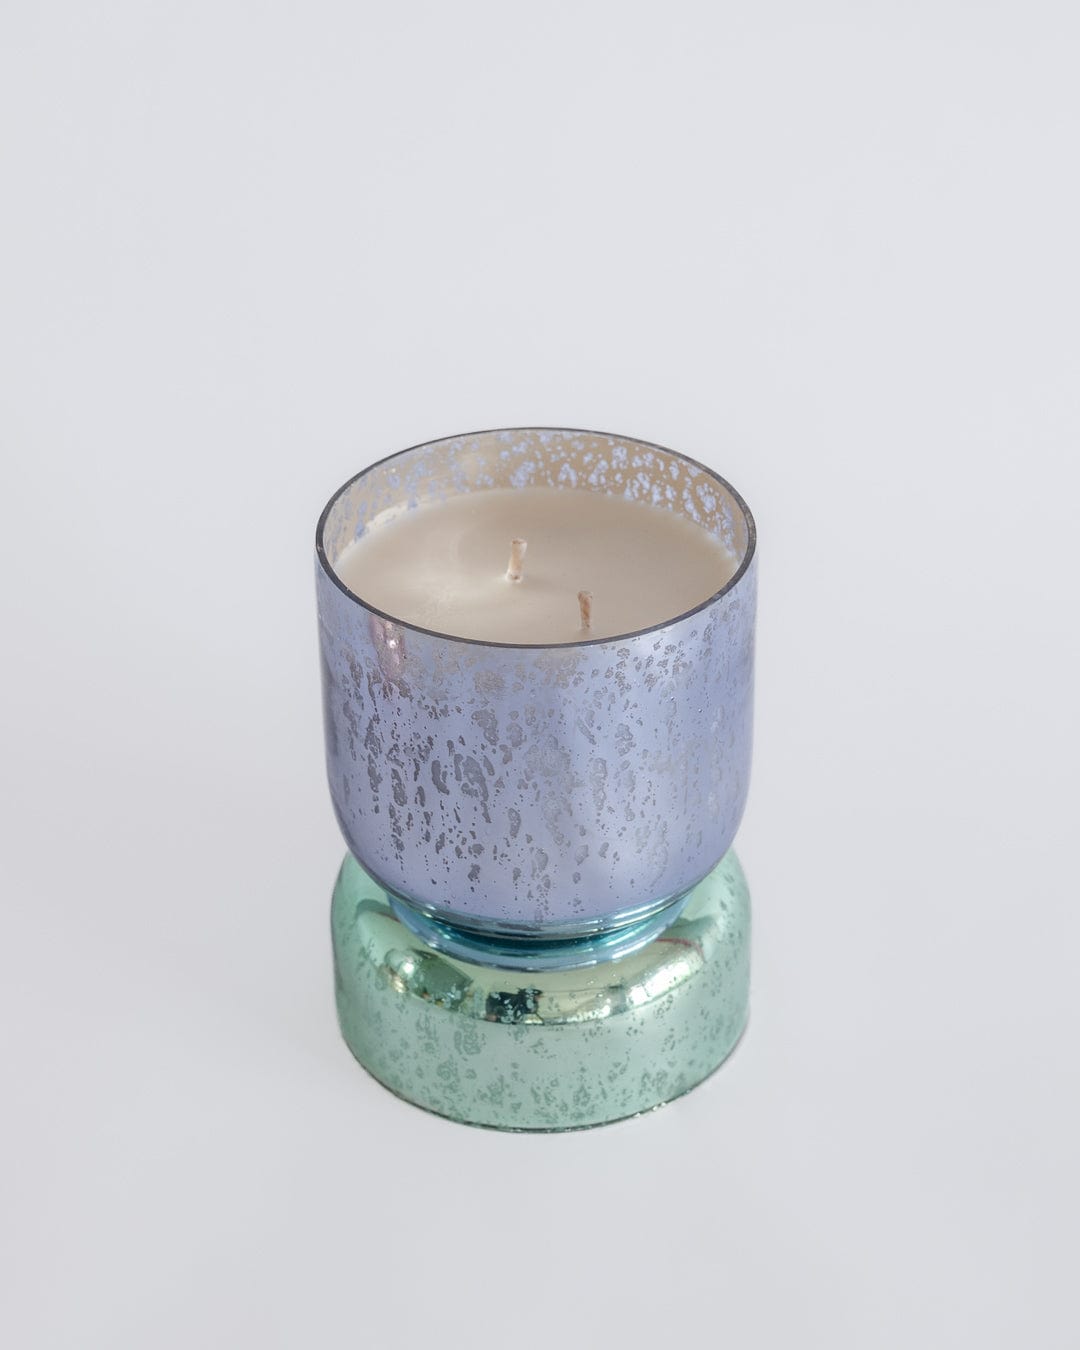 Shimmer Hourglass Soy Wax Candle in Hand Blown Glass